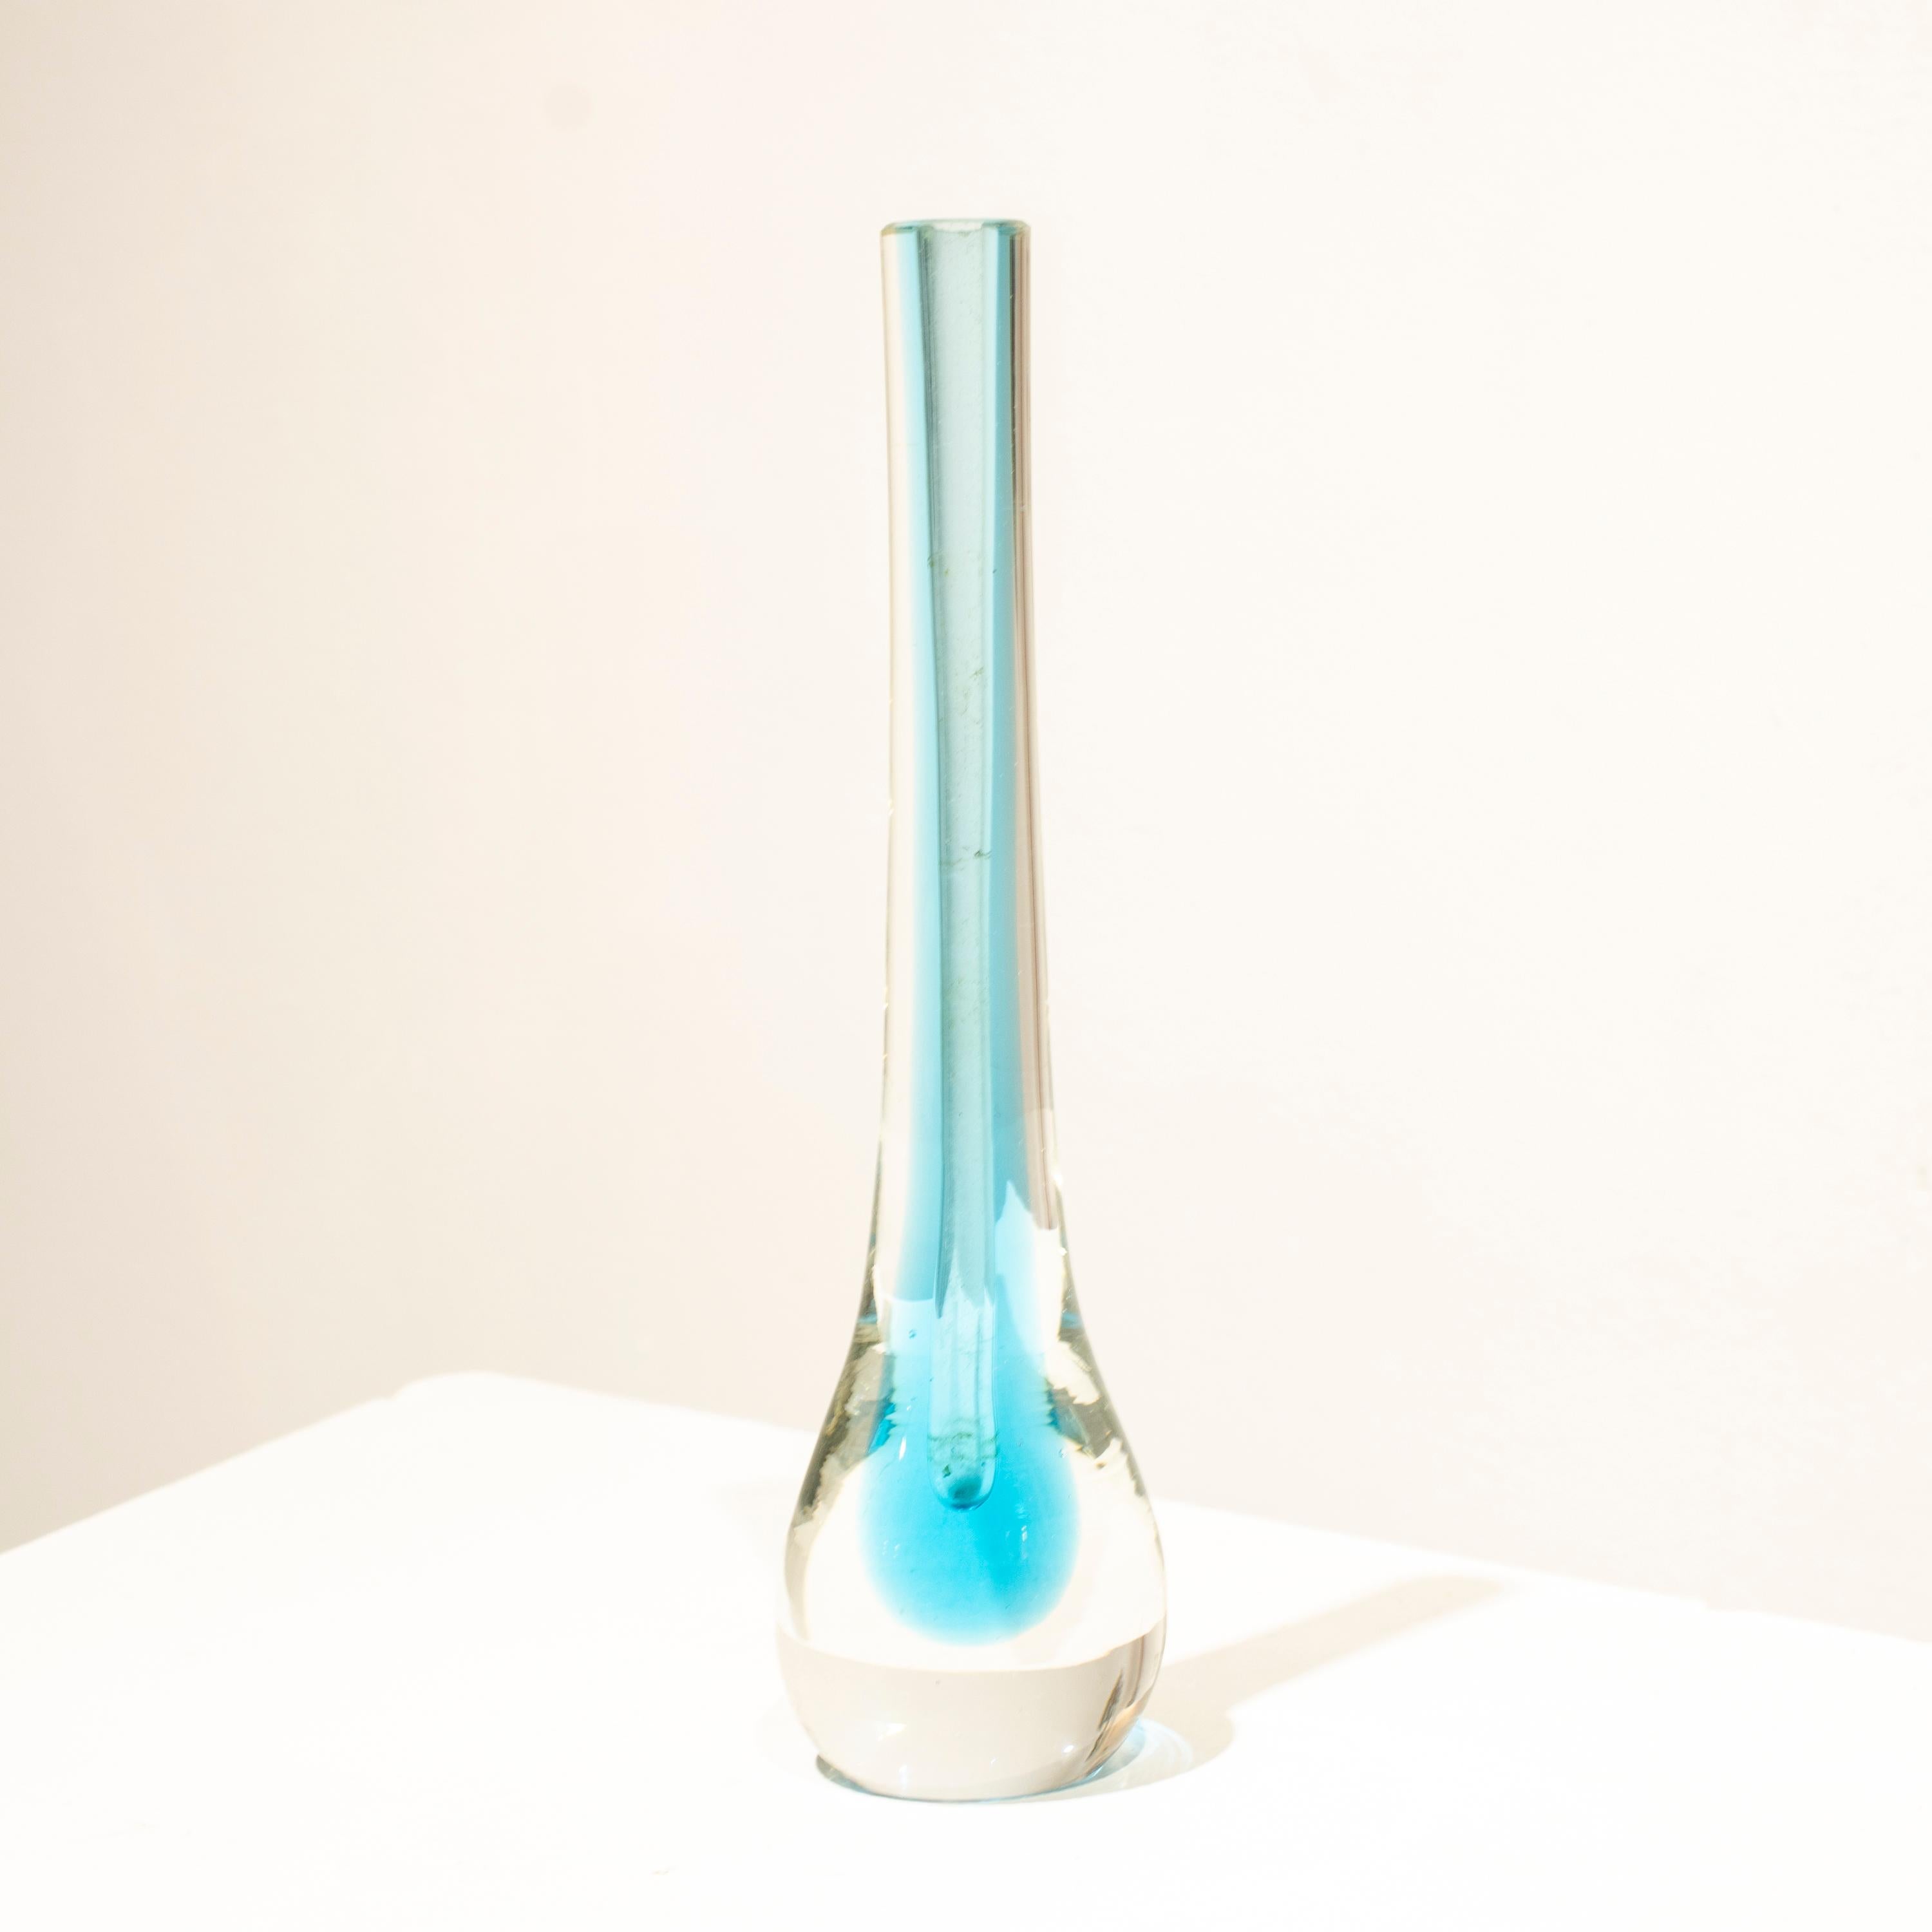 Italian small vase designed by Flavio Poli in the 1970's. The vase is hand-crafted in Murano glass with a tear-shape in blue. 